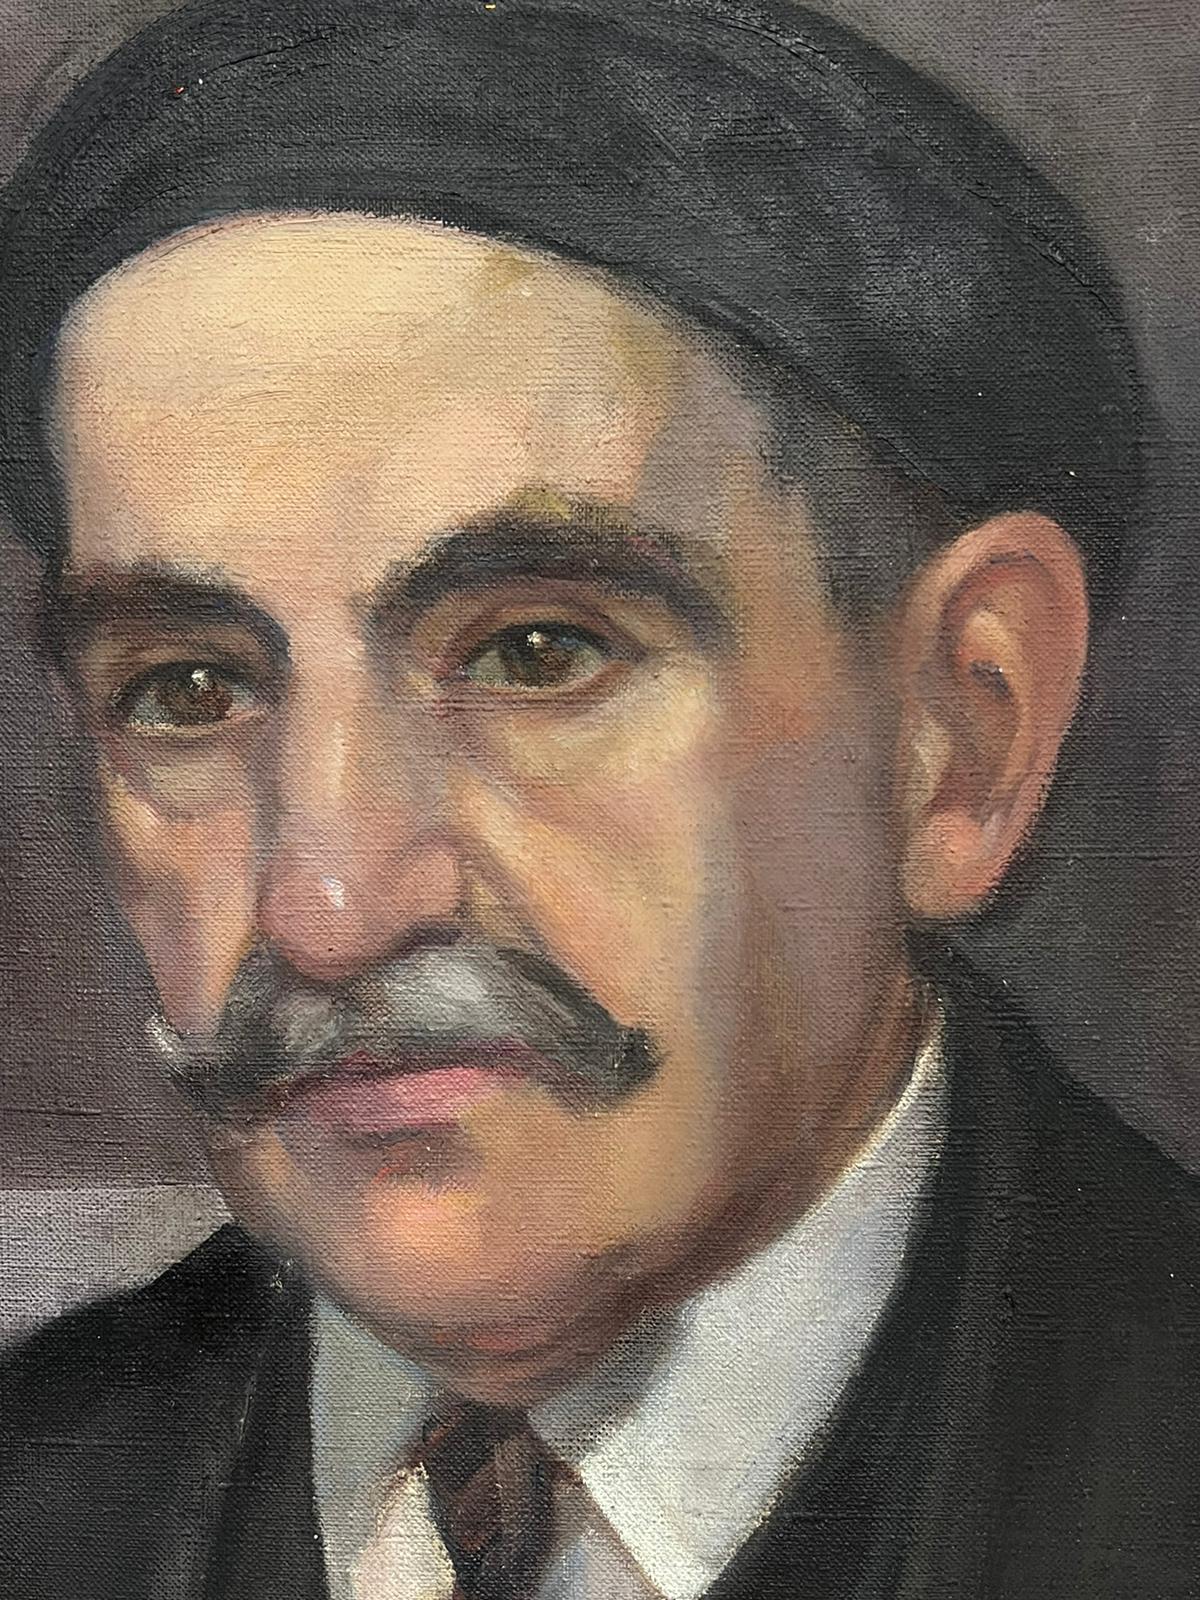 The Man with the Moustache
signed by Louise Alix (French, 1888-1980) *see notes below
oil painting on canvas unframed
measures: 18 inches high by 23.5 inches wide
condition: overall very good and sound, a few scuffs and marks to the surface and wear